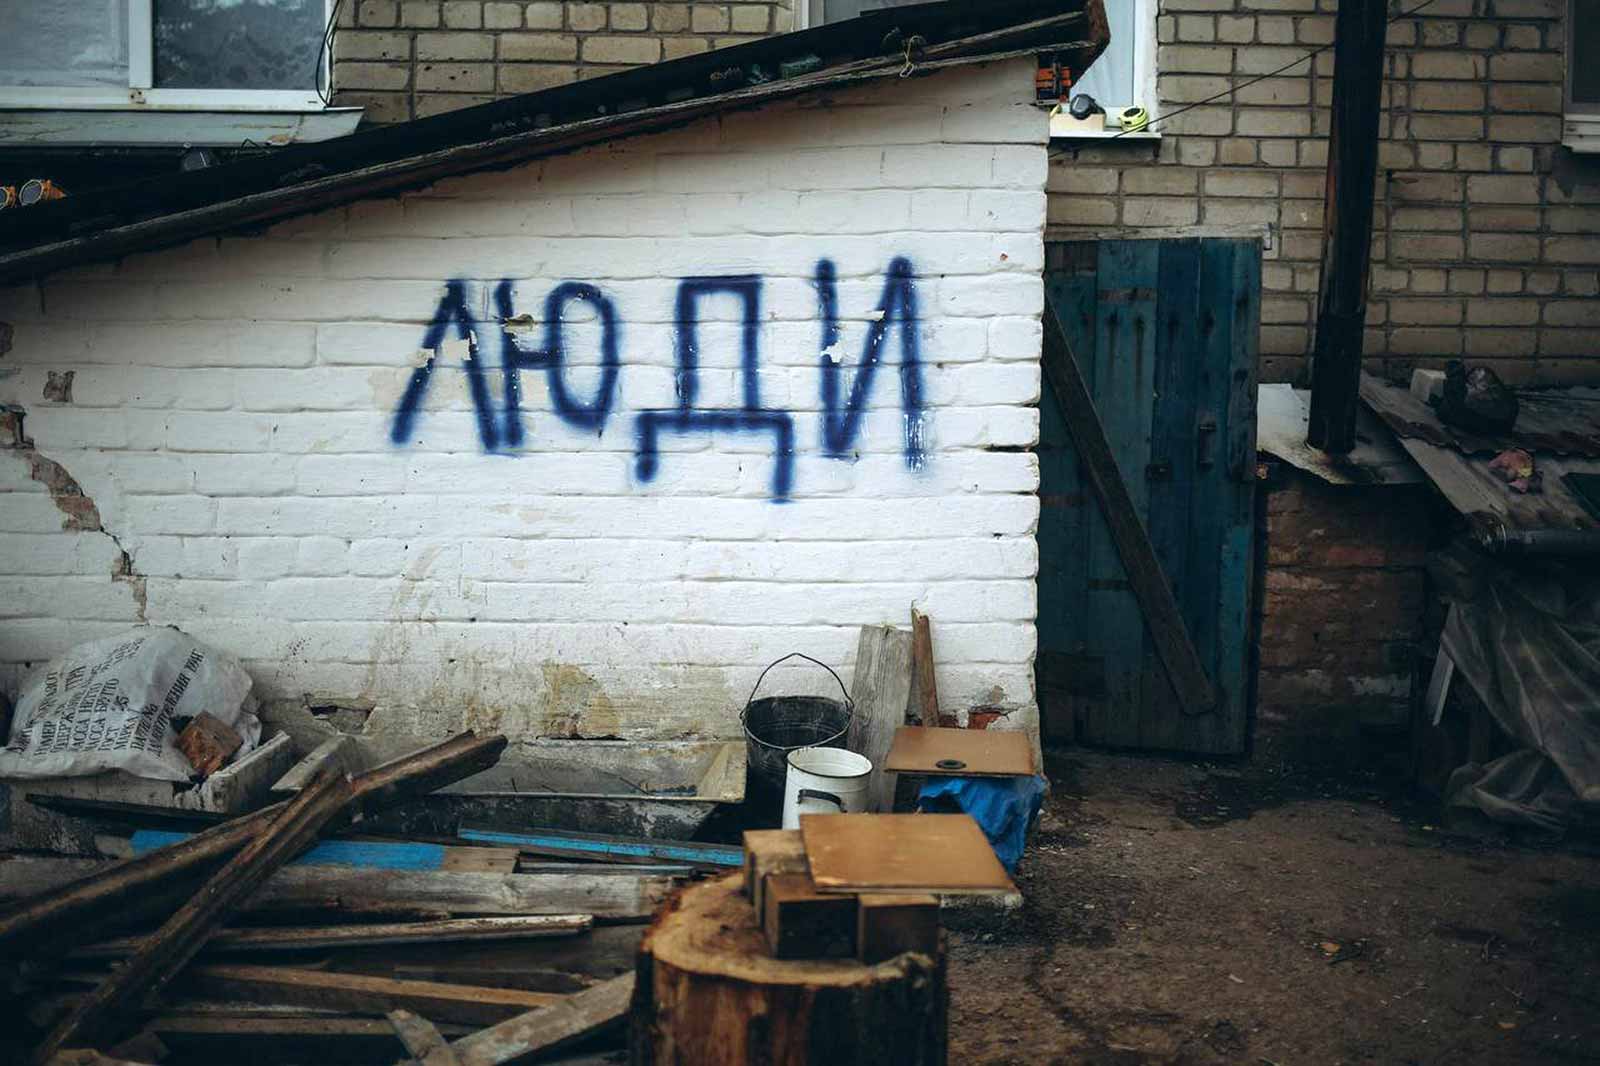 The word люди, meaning people in Russian, is painted on the wall to flag to the military that civilians are sheltering in the basement. © Anastasia Rokytna/IWPR